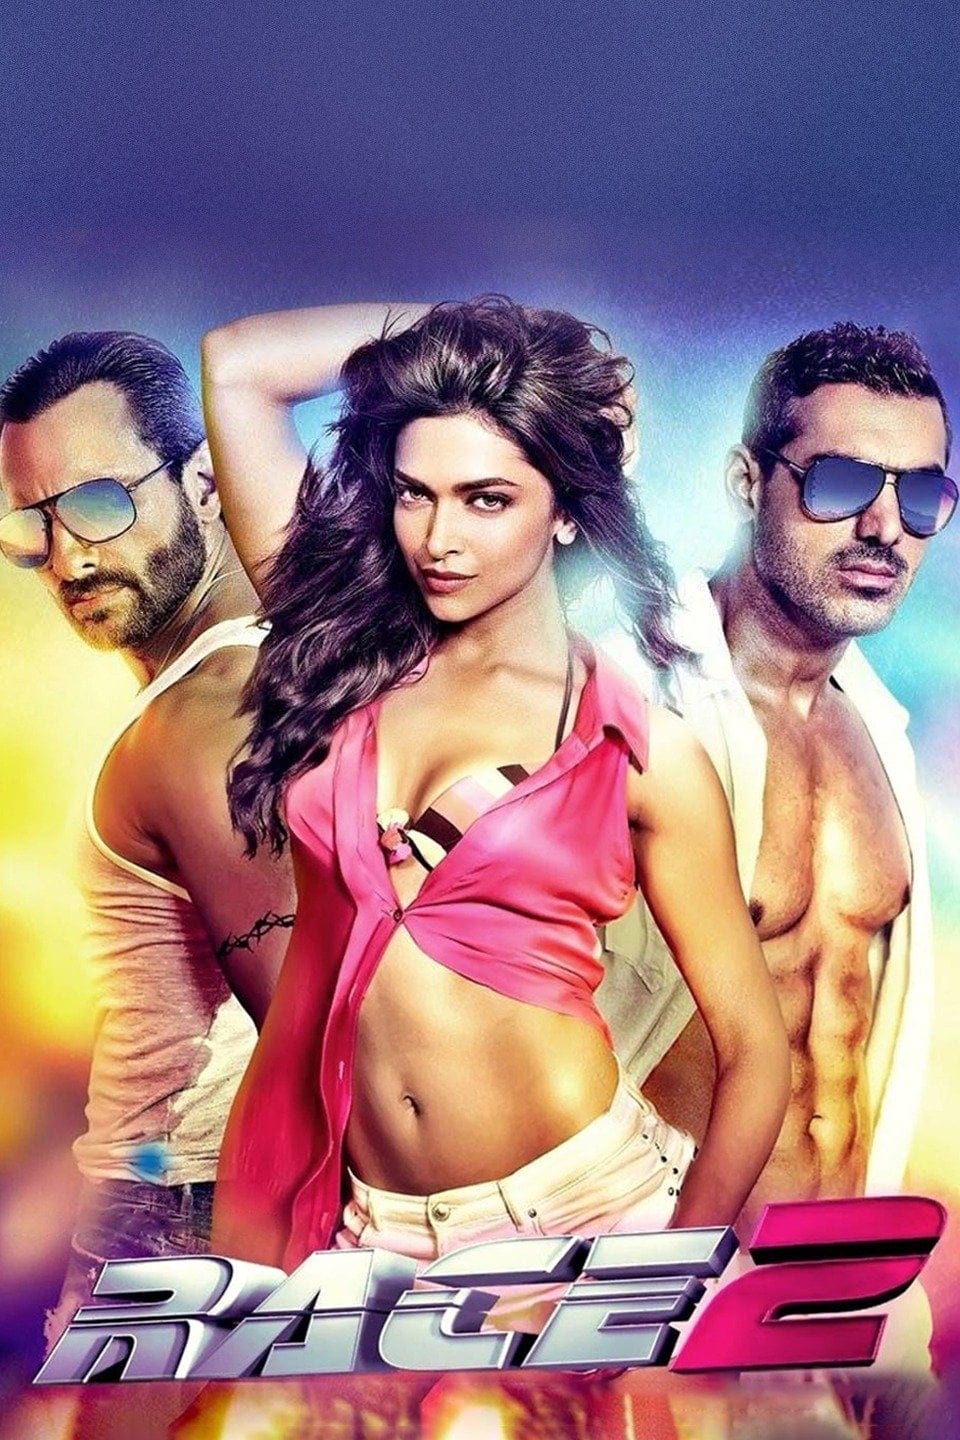 Poster for the movie "Race 2"